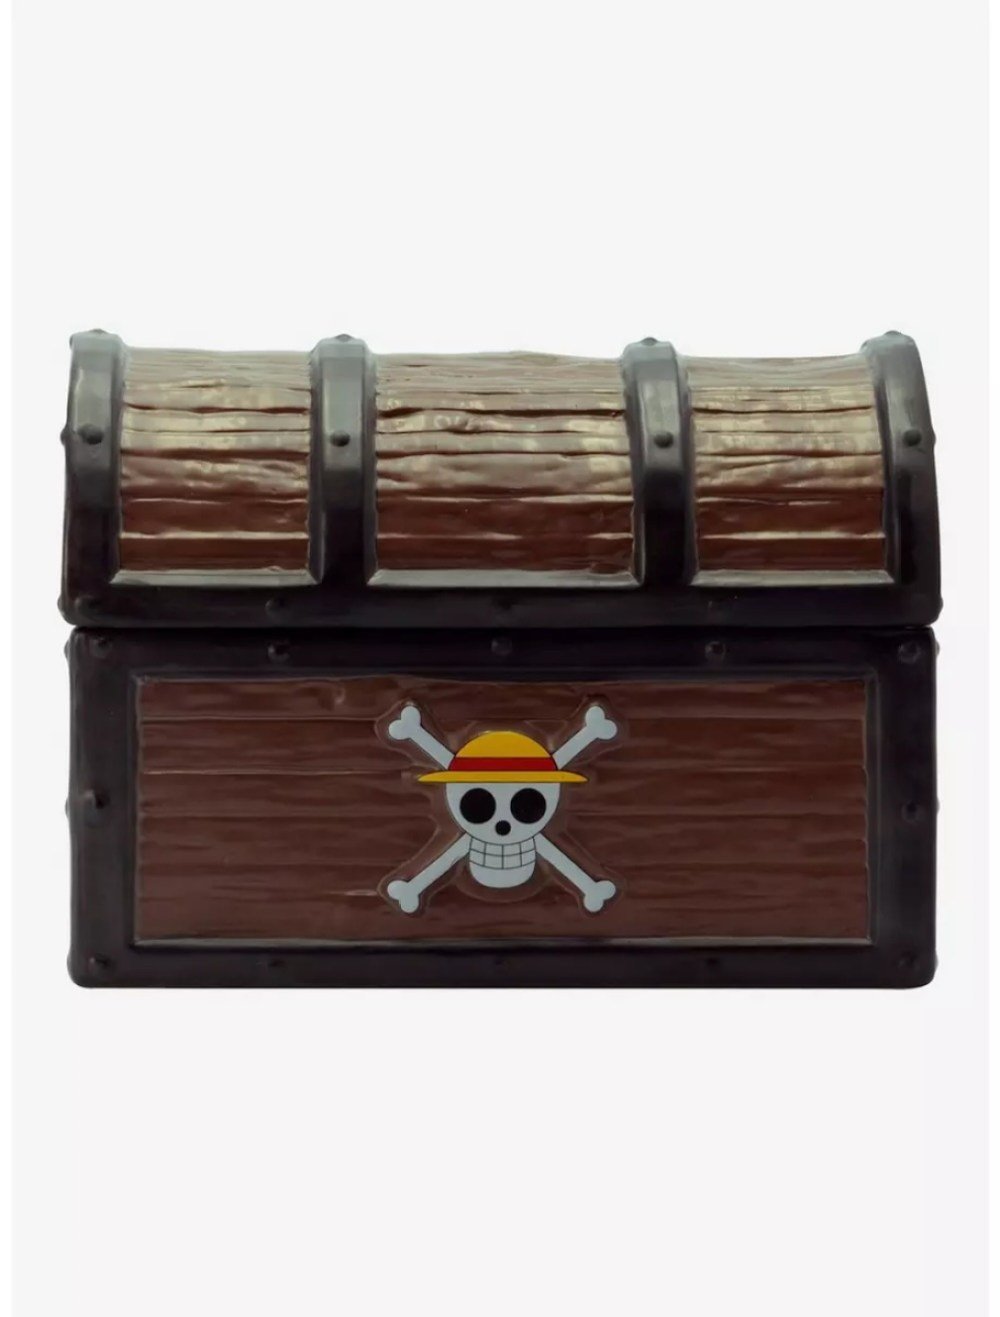 Treasure Chest Cookie Jar with Straw Hat Jolly Roger on front